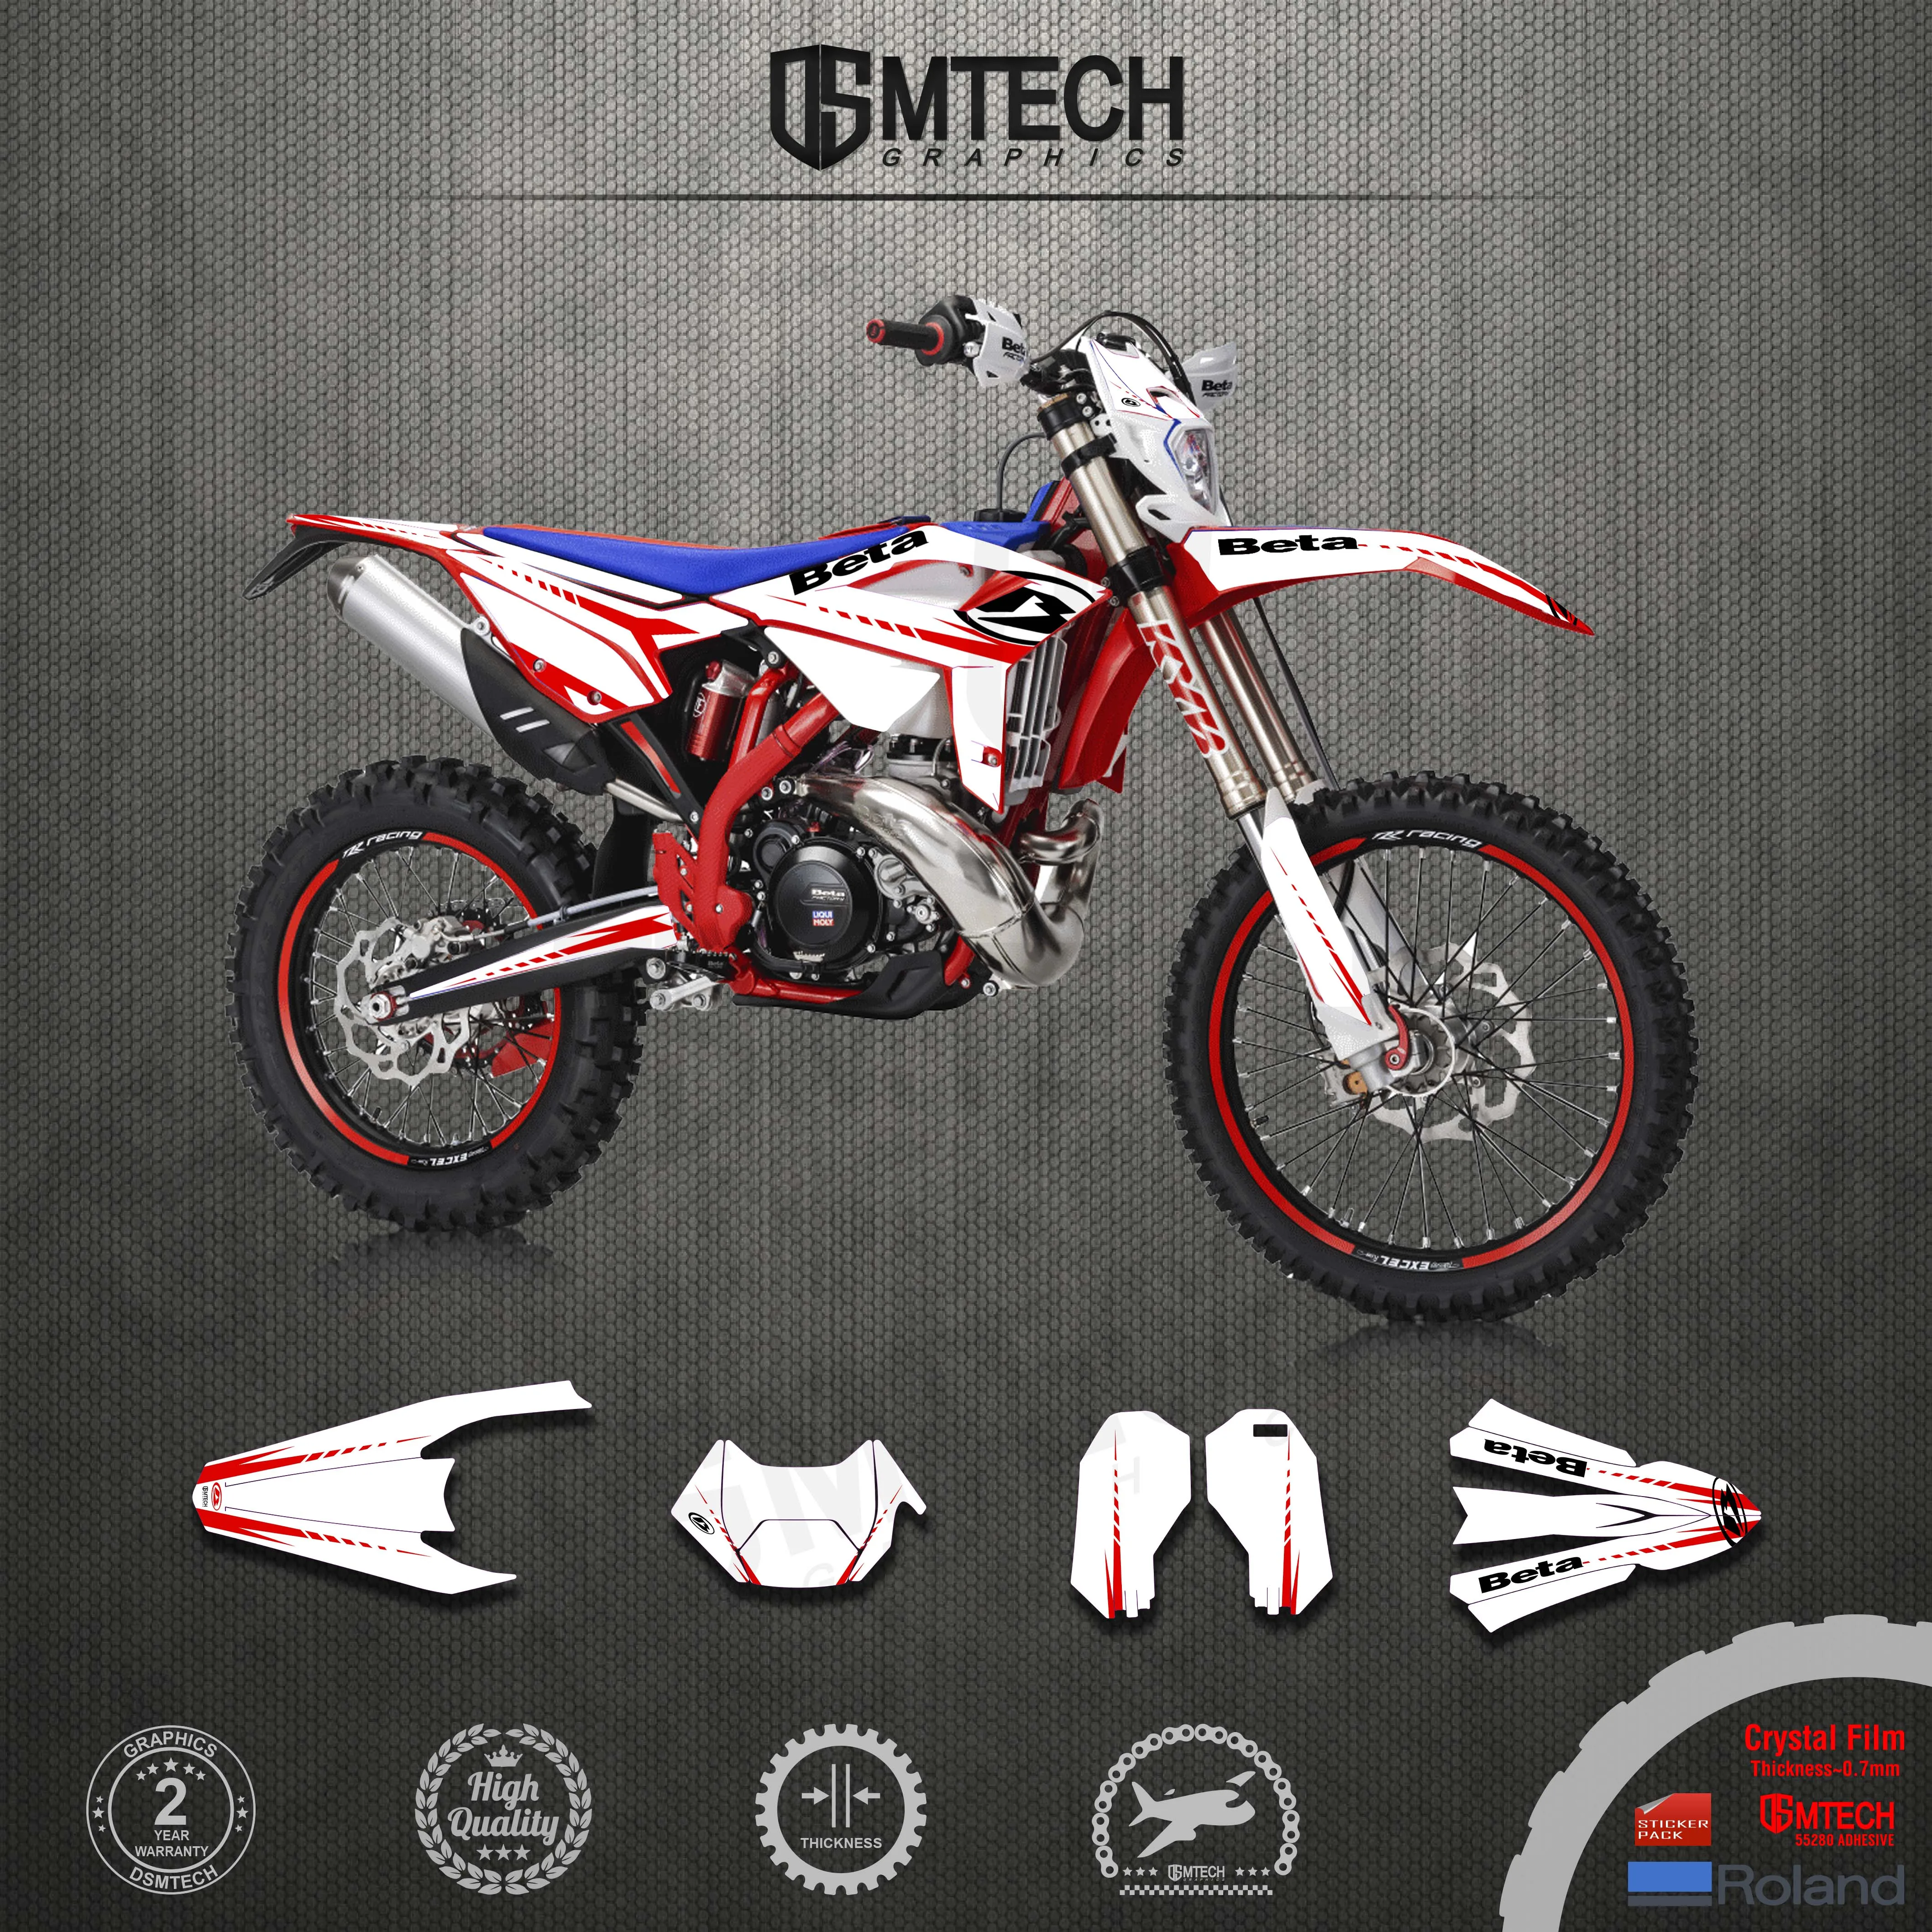 DSMTECH  Motorcycle Team Graphics Decal & Sticker Kit For  BETA RR 2020-2022  2020 2021 2022  graphics 20-22 BETARR